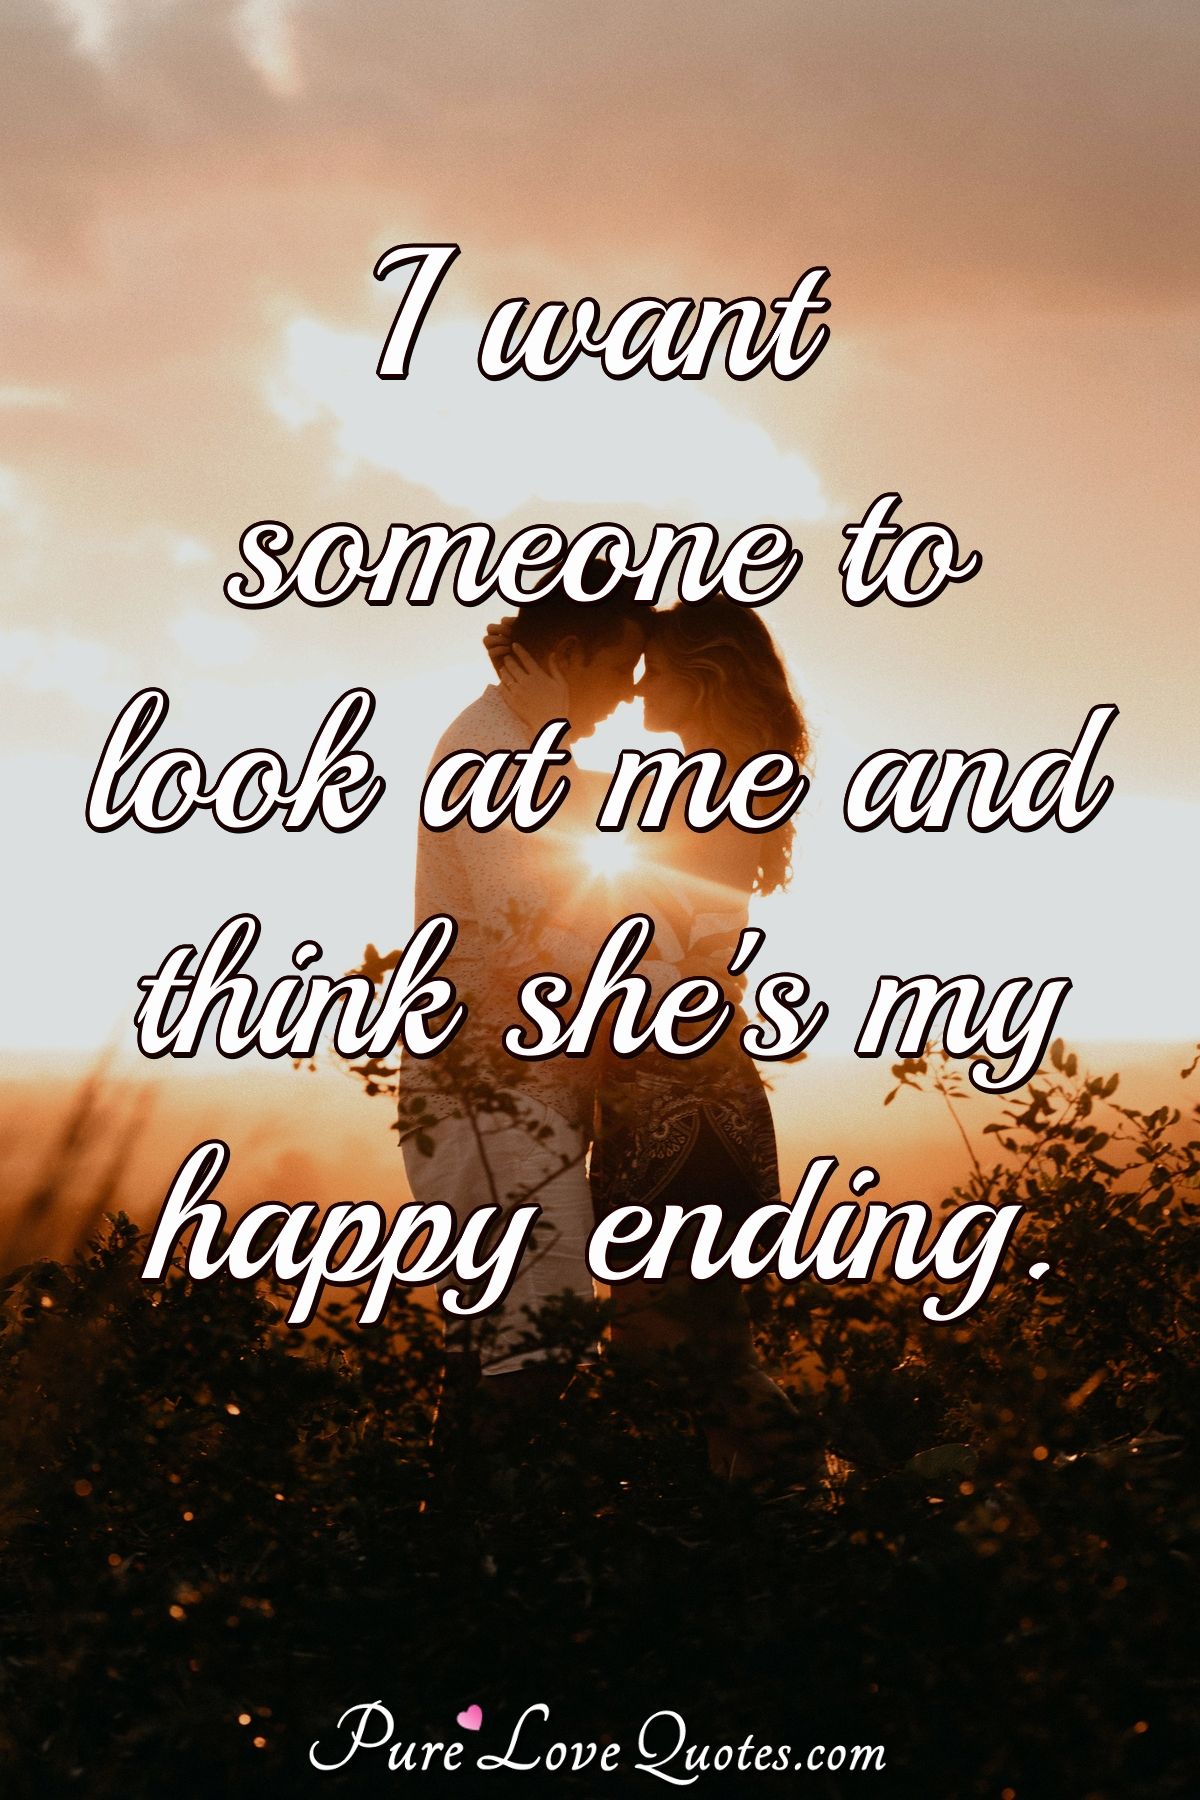 I want someone to look at me and think she's my happy ending. - Anonymous